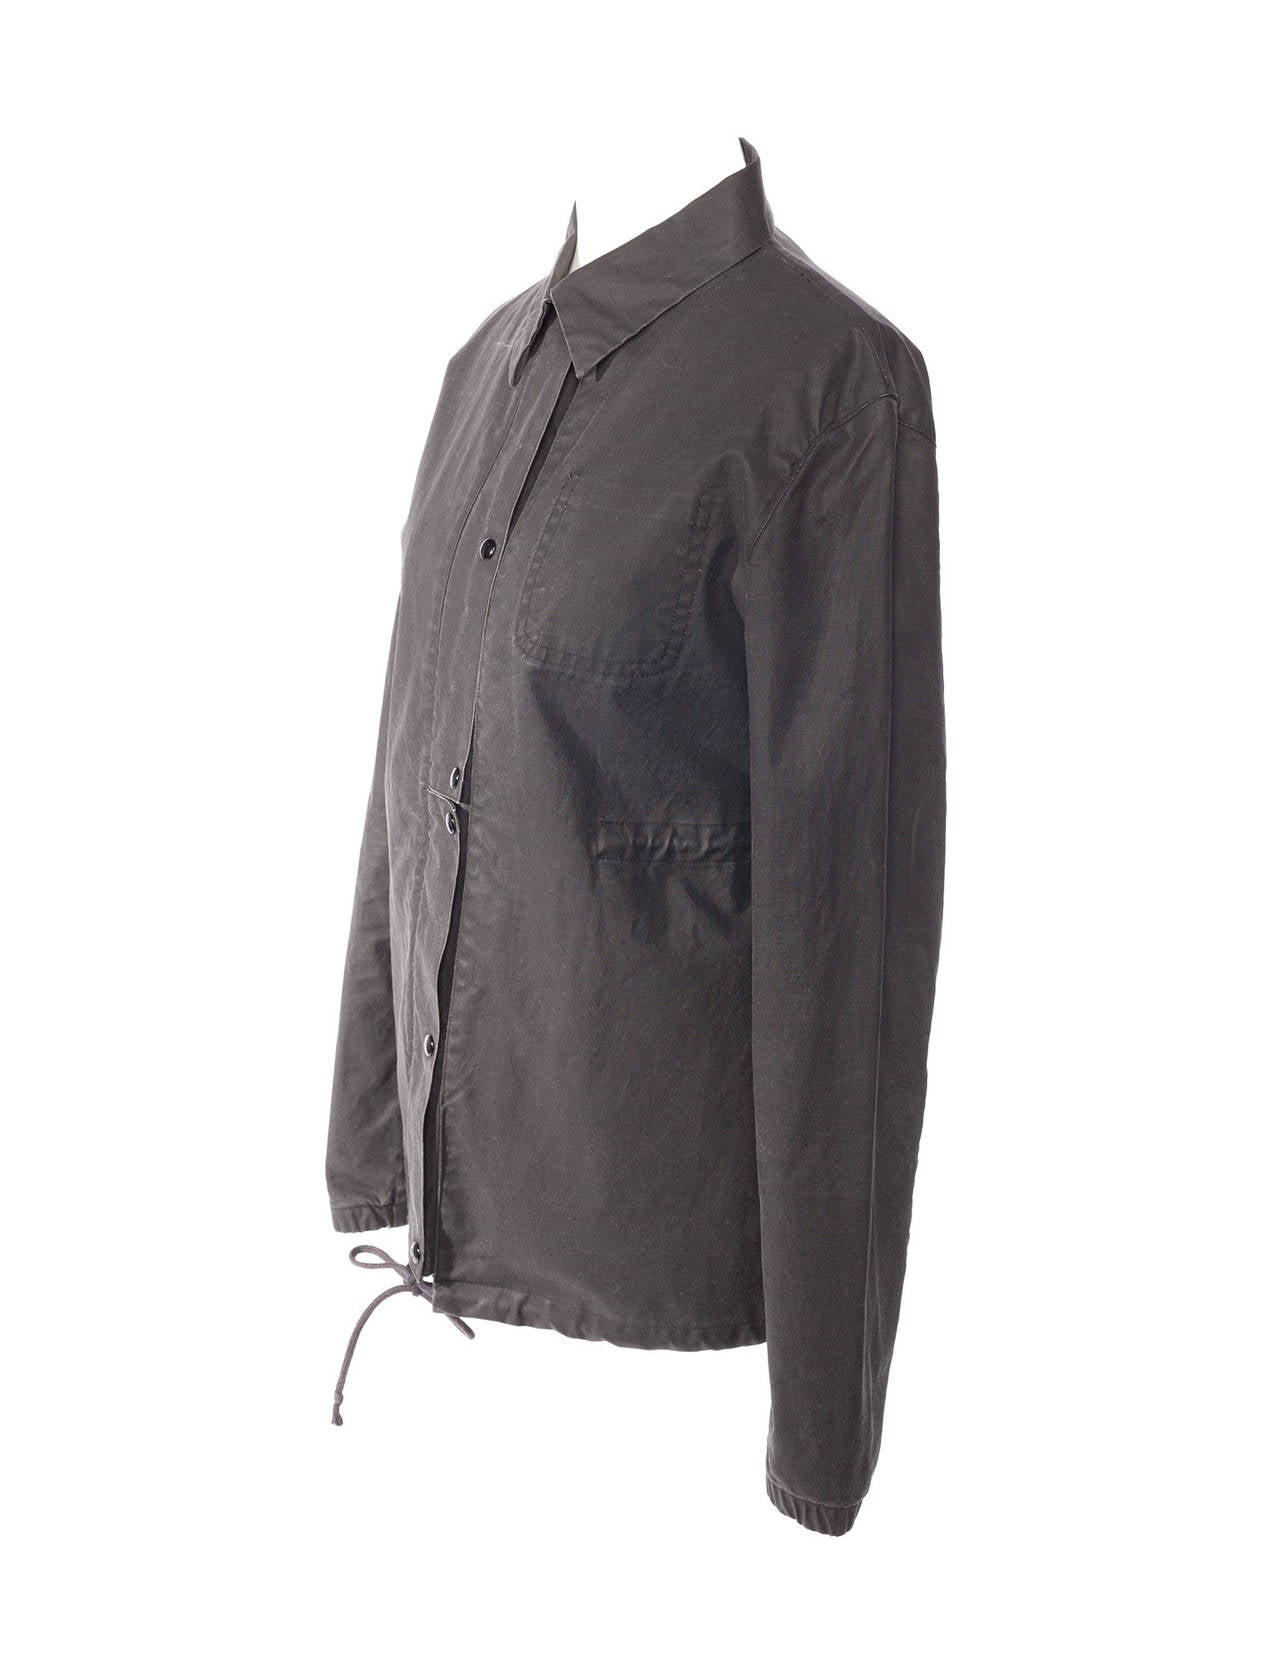 Helmut Lang 1998 jacket in grey resin cotton. Jacket is army style with shirt collar, silver zipper, 6 snaps, drawstring at waist and at hem, hidden pocket on left side chest.